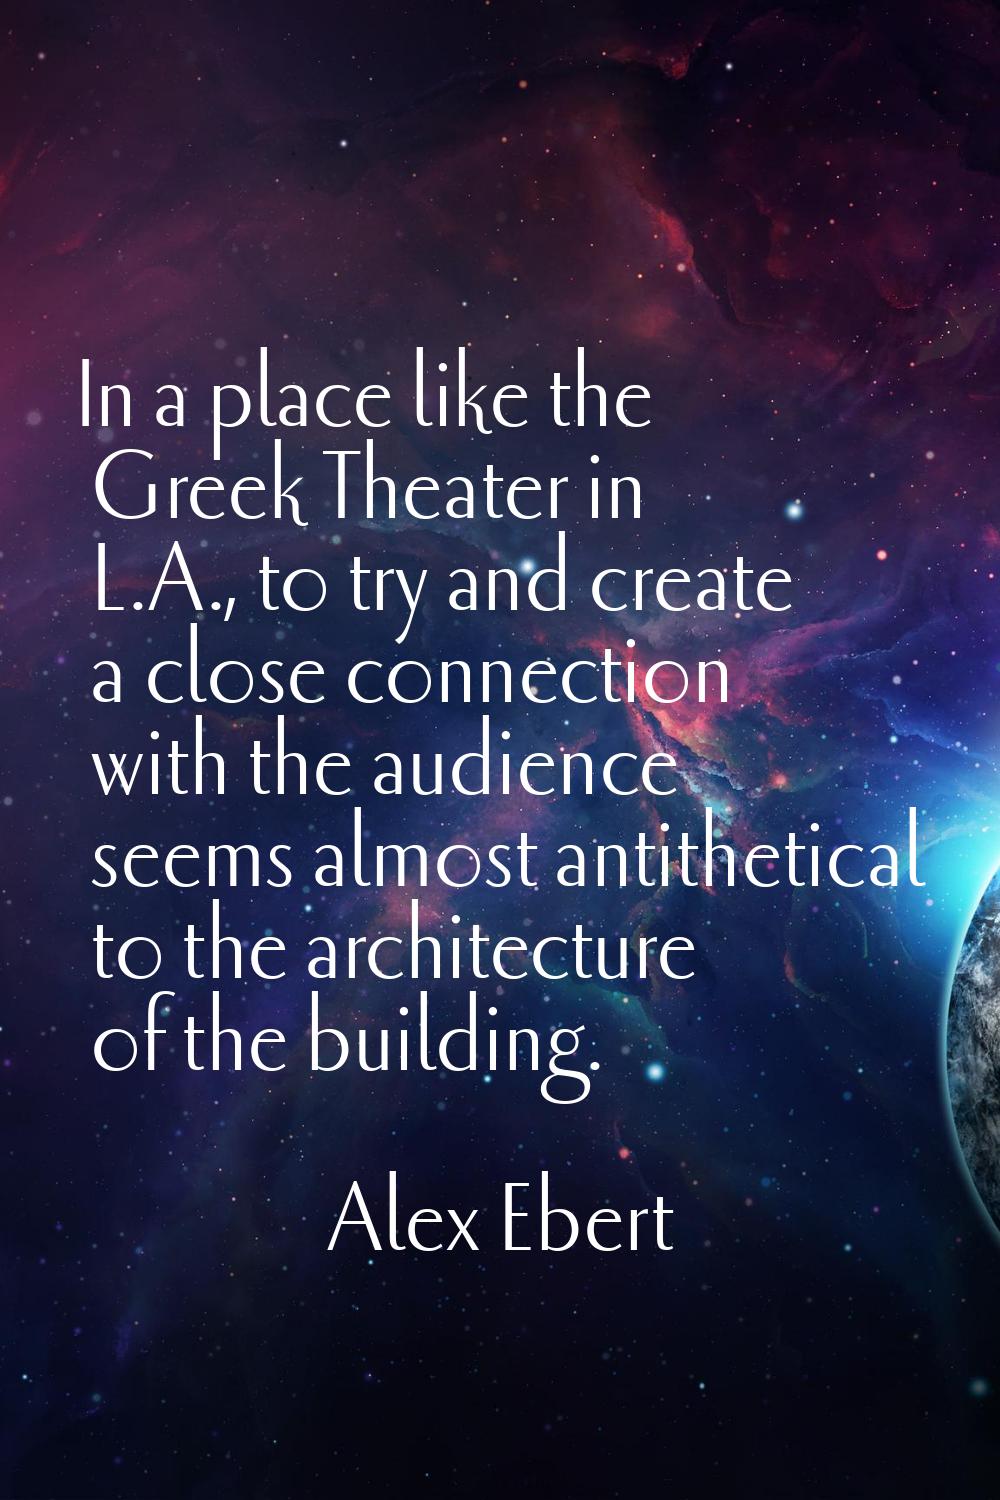 In a place like the Greek Theater in L.A., to try and create a close connection with the audience s